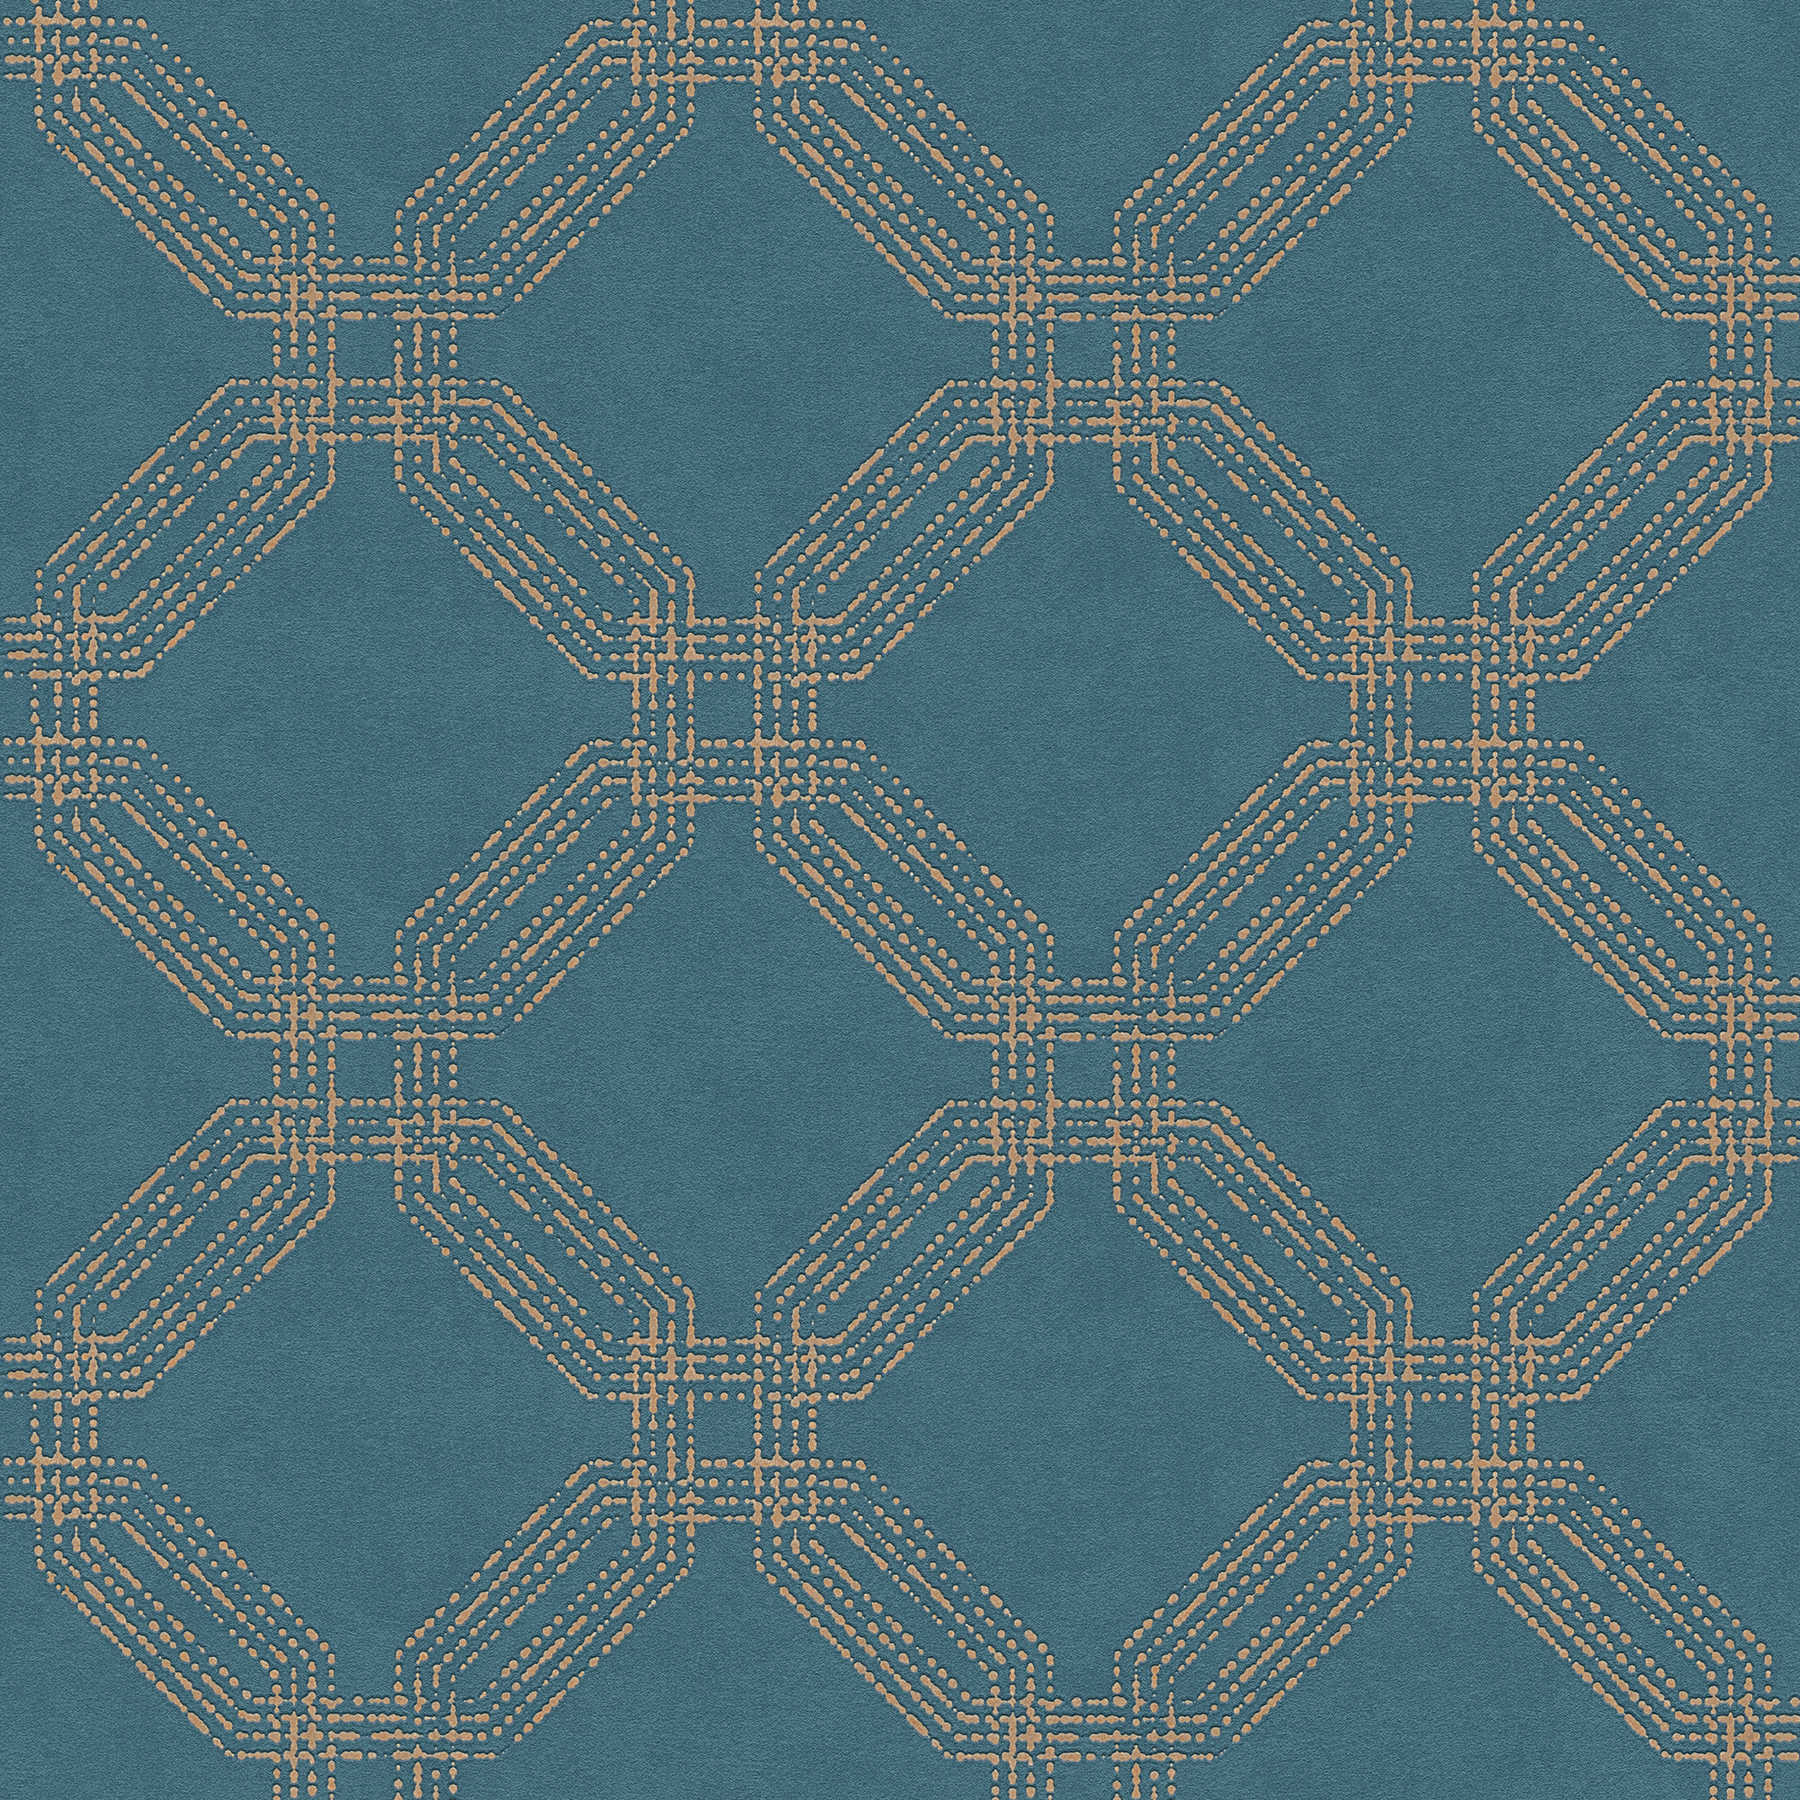 Wallpaper with diamond look, textured - blue, gold
